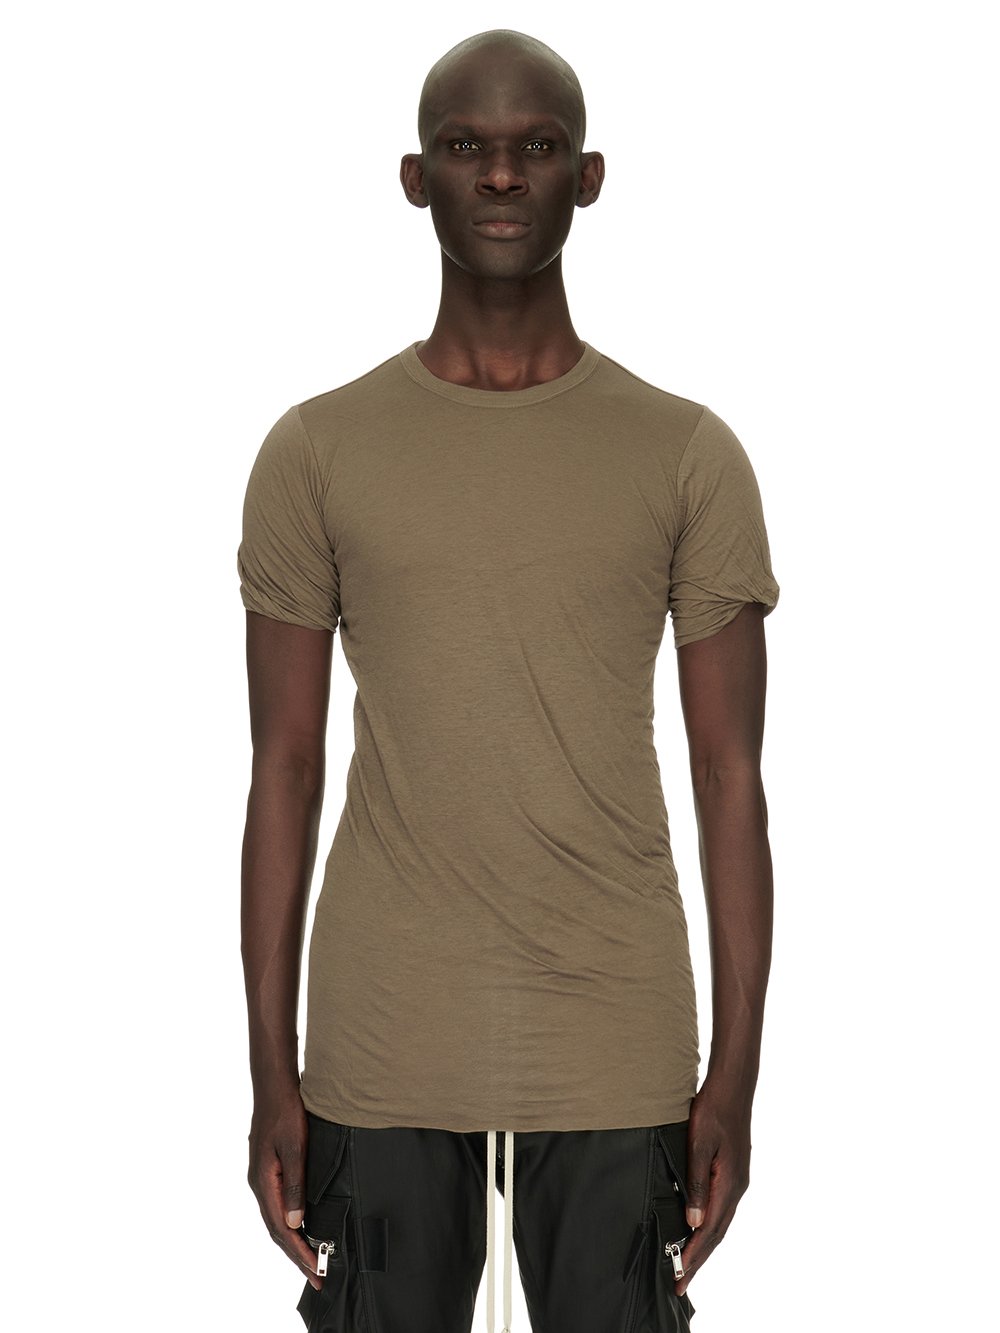 RICK OWENS FW23 LUXOR DOUBLE SS T IN DUST GREY UNSTABLE COTTON